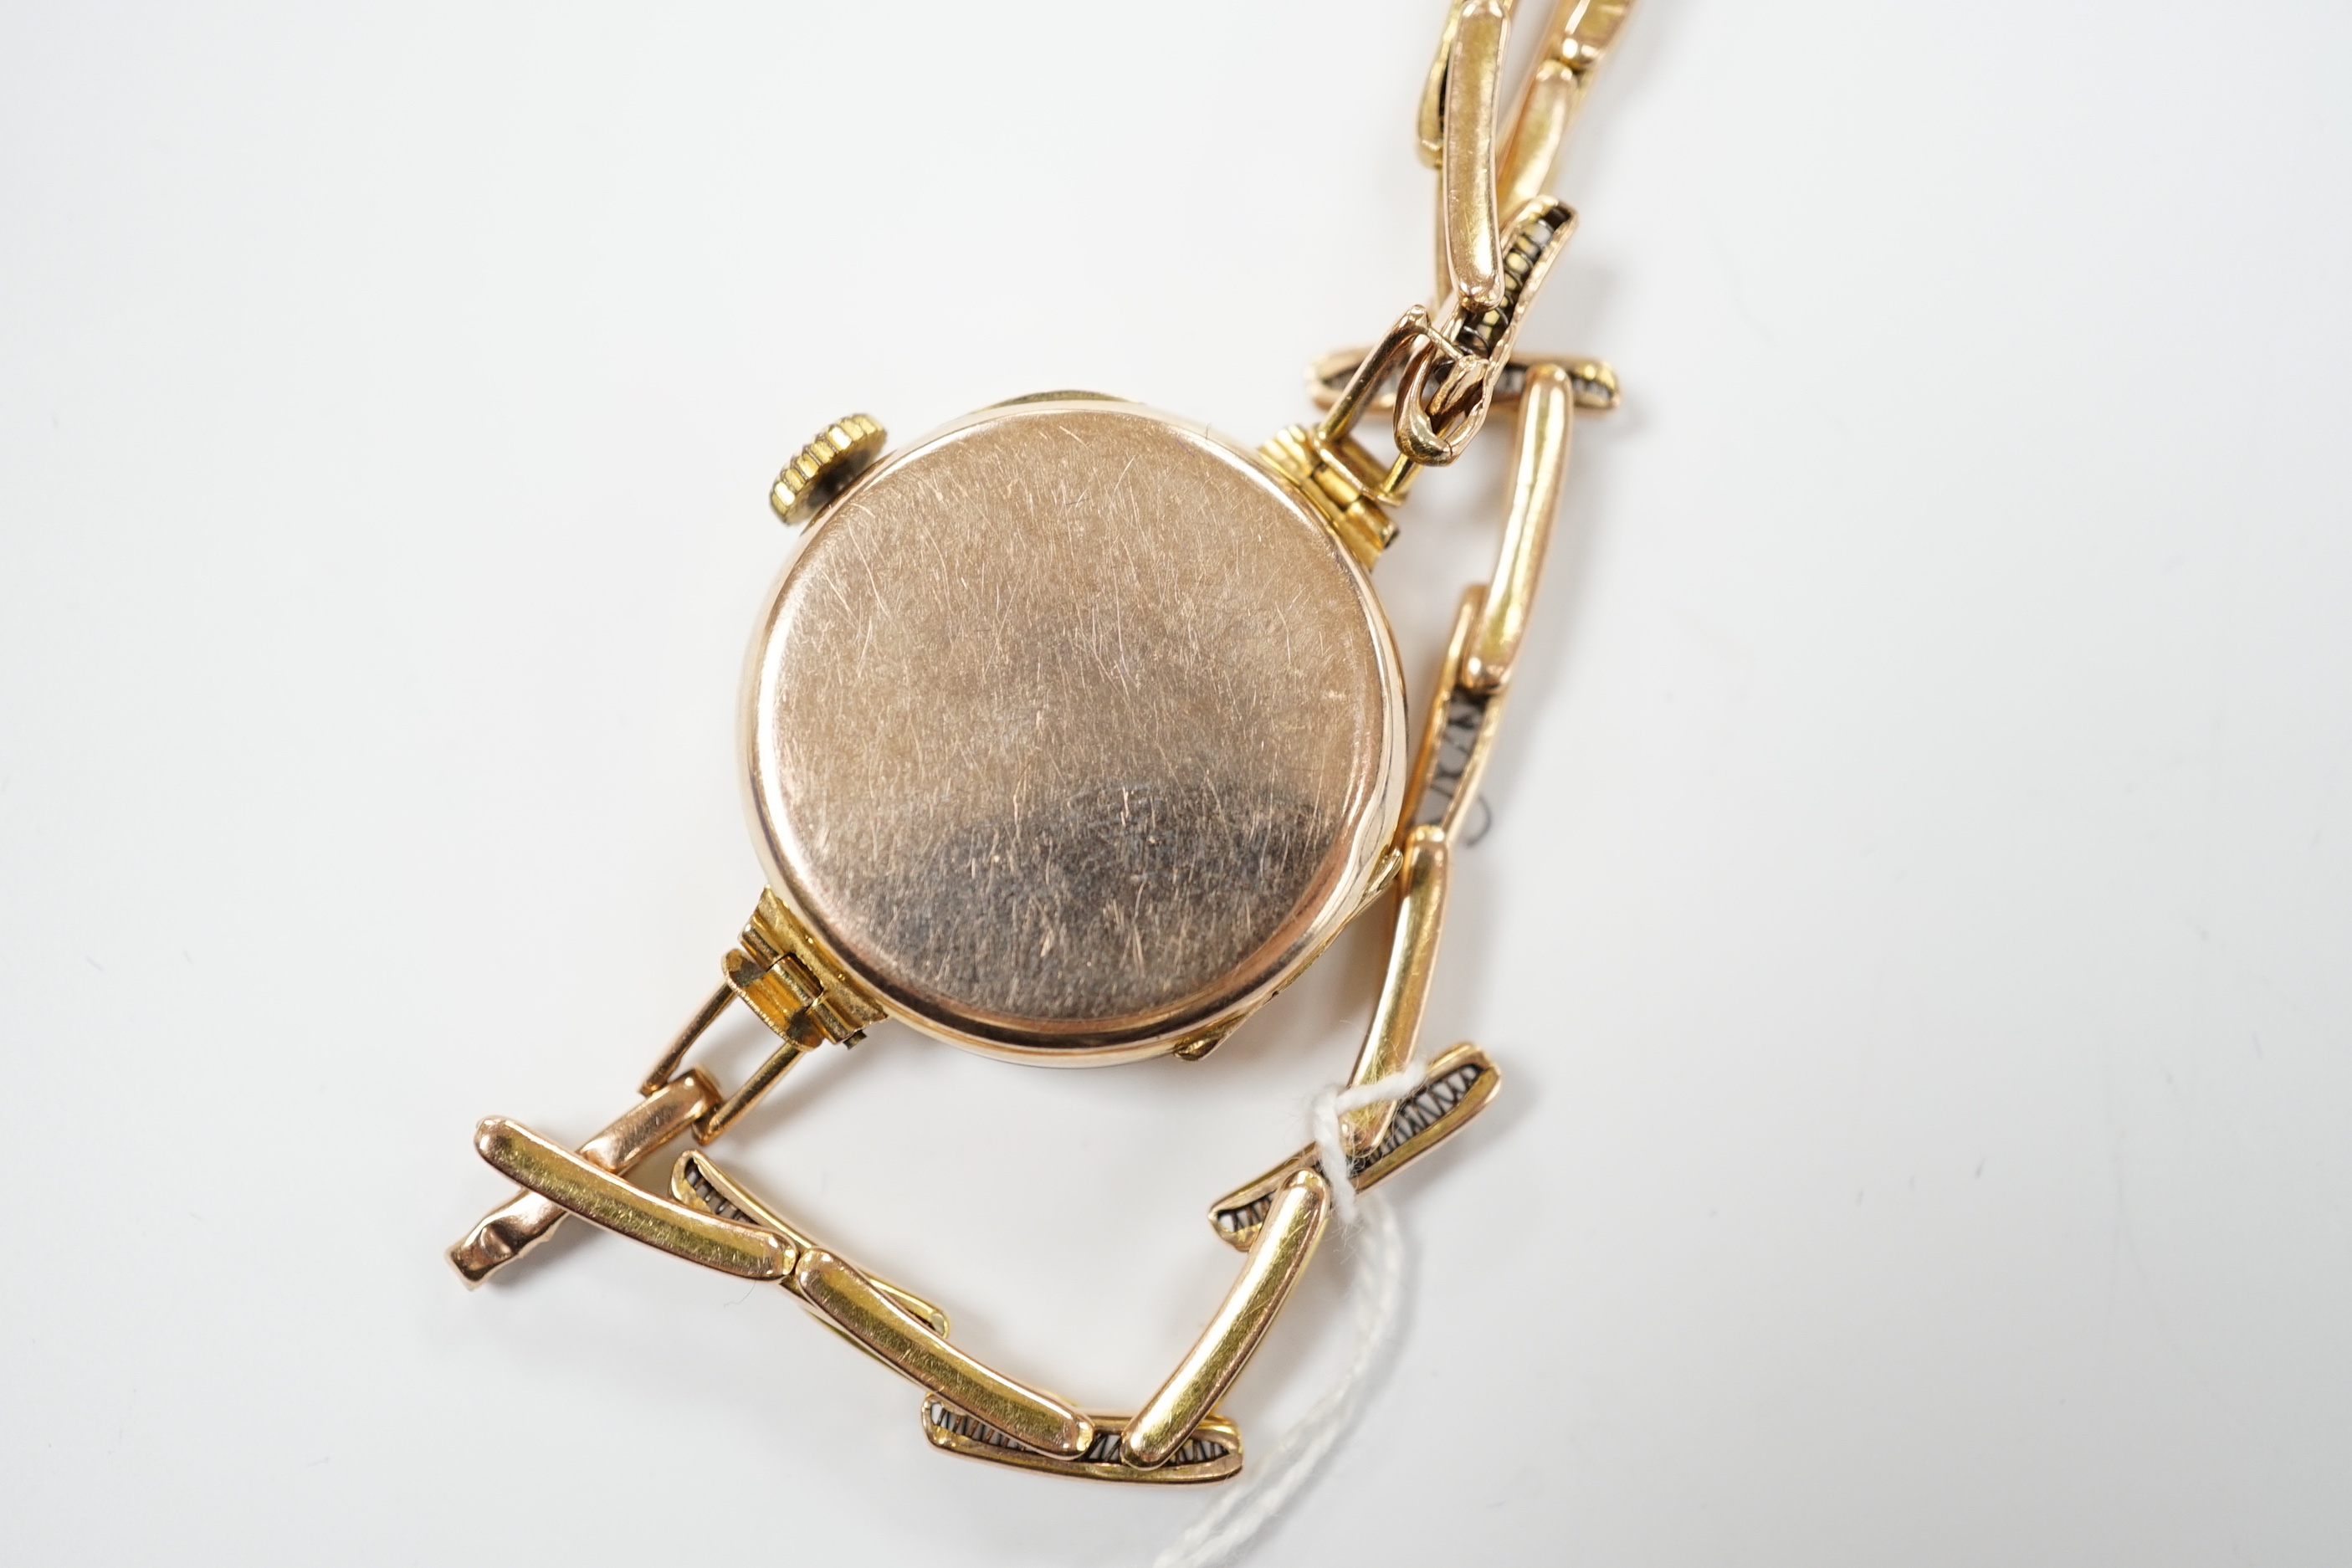 An early 20th century 9ct gold manual wind wrist watch, on a 9ct expanding bracelet, case diameter 25mm, gross weight 14.9 grams.